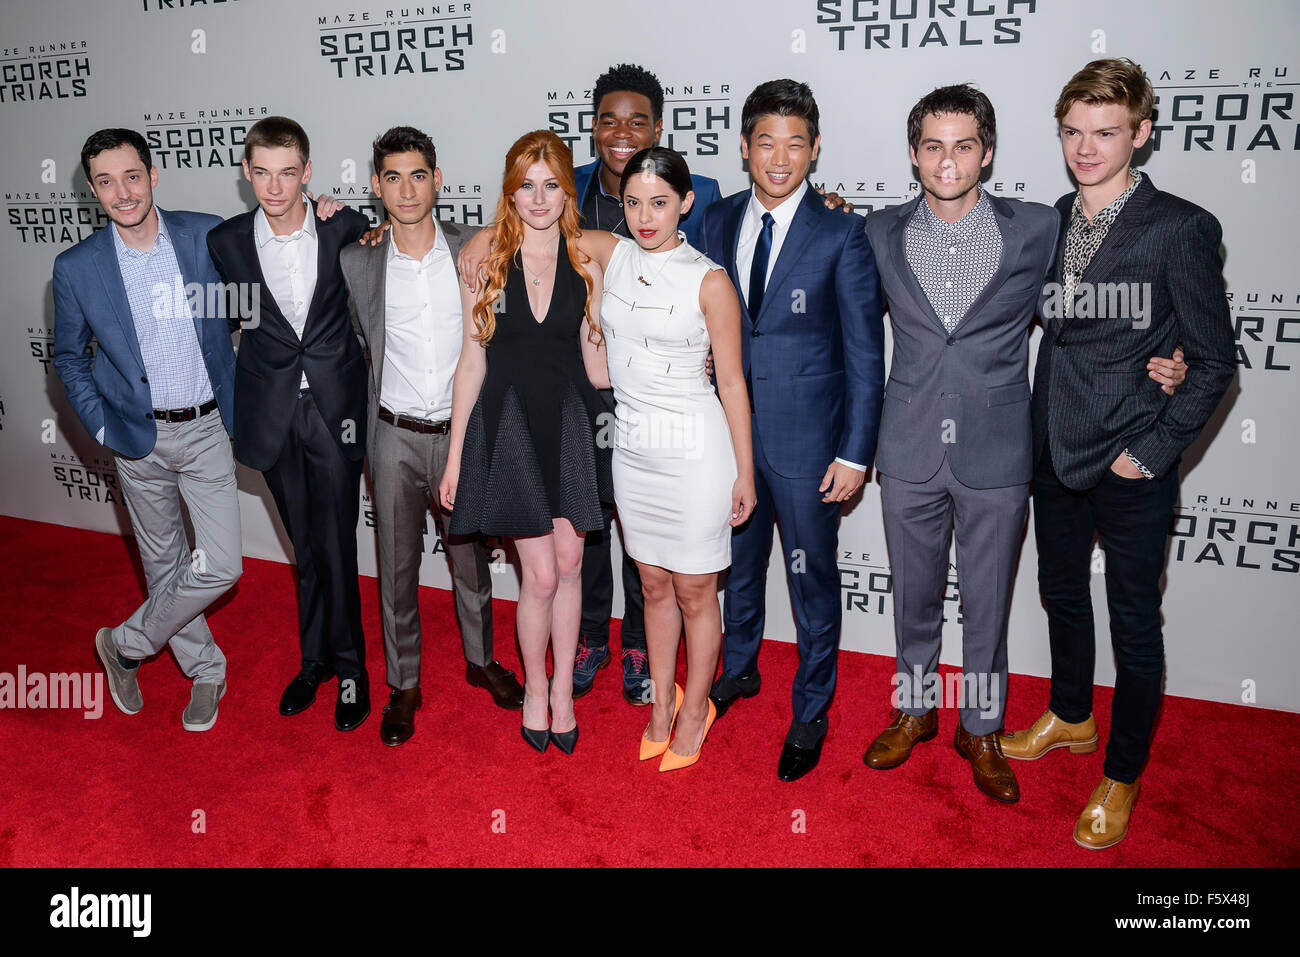 New York premiere of 'Maze Runner: The Scorch Trials' held at Regal E-Walk  - Arrivals Featuring: the cast of Maze Runner: The Scorch Trials Where:  New York, New York, United States When